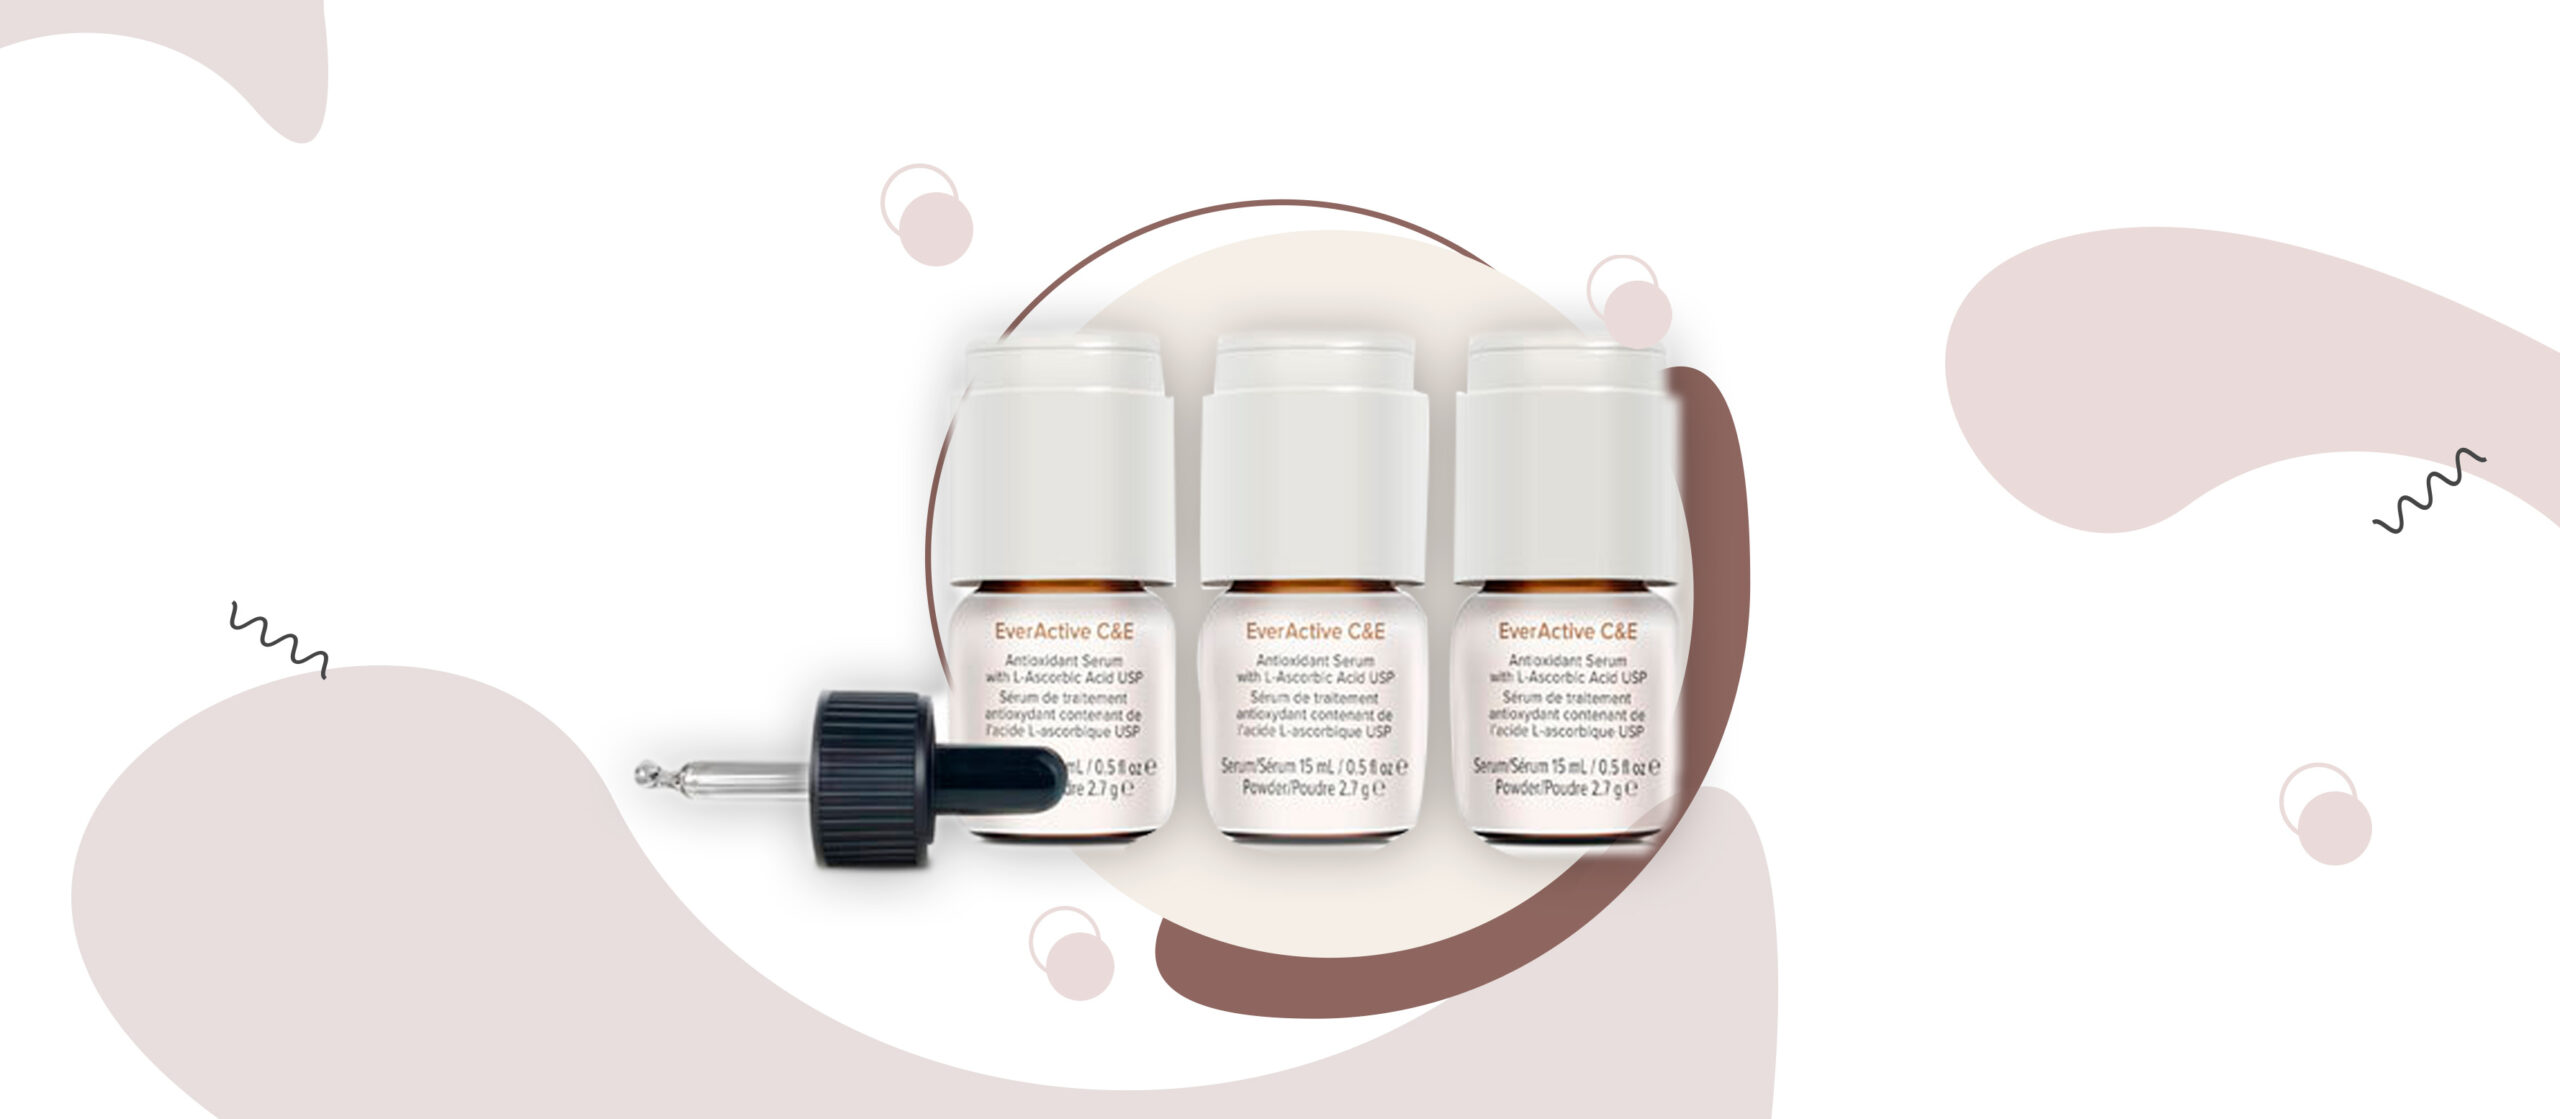 EverActive C&E™ + Peptide - products